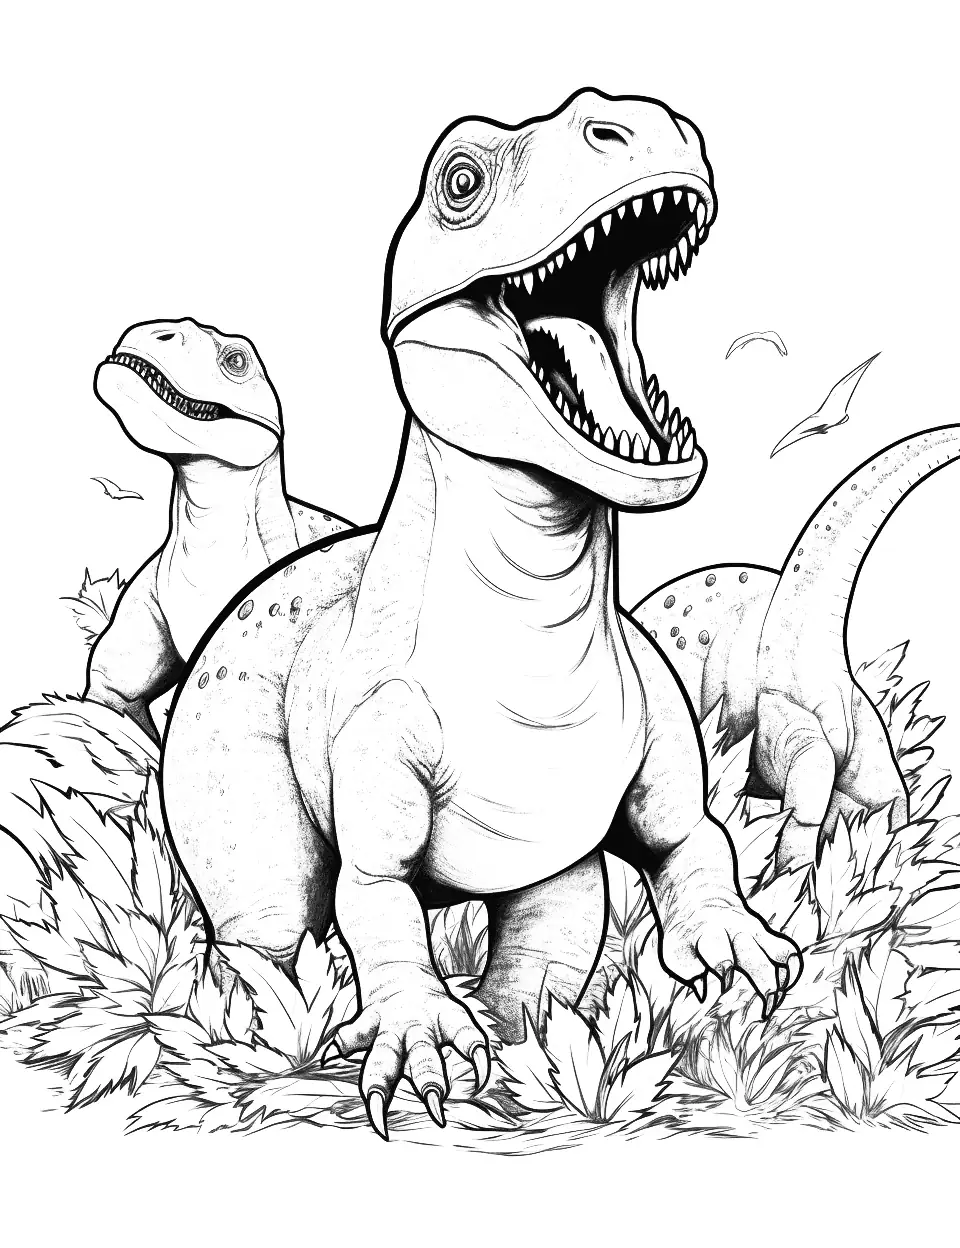 Raptor Pack in Action Coloring Page - The Velociraptor pack in an action scene from Jurassic World.